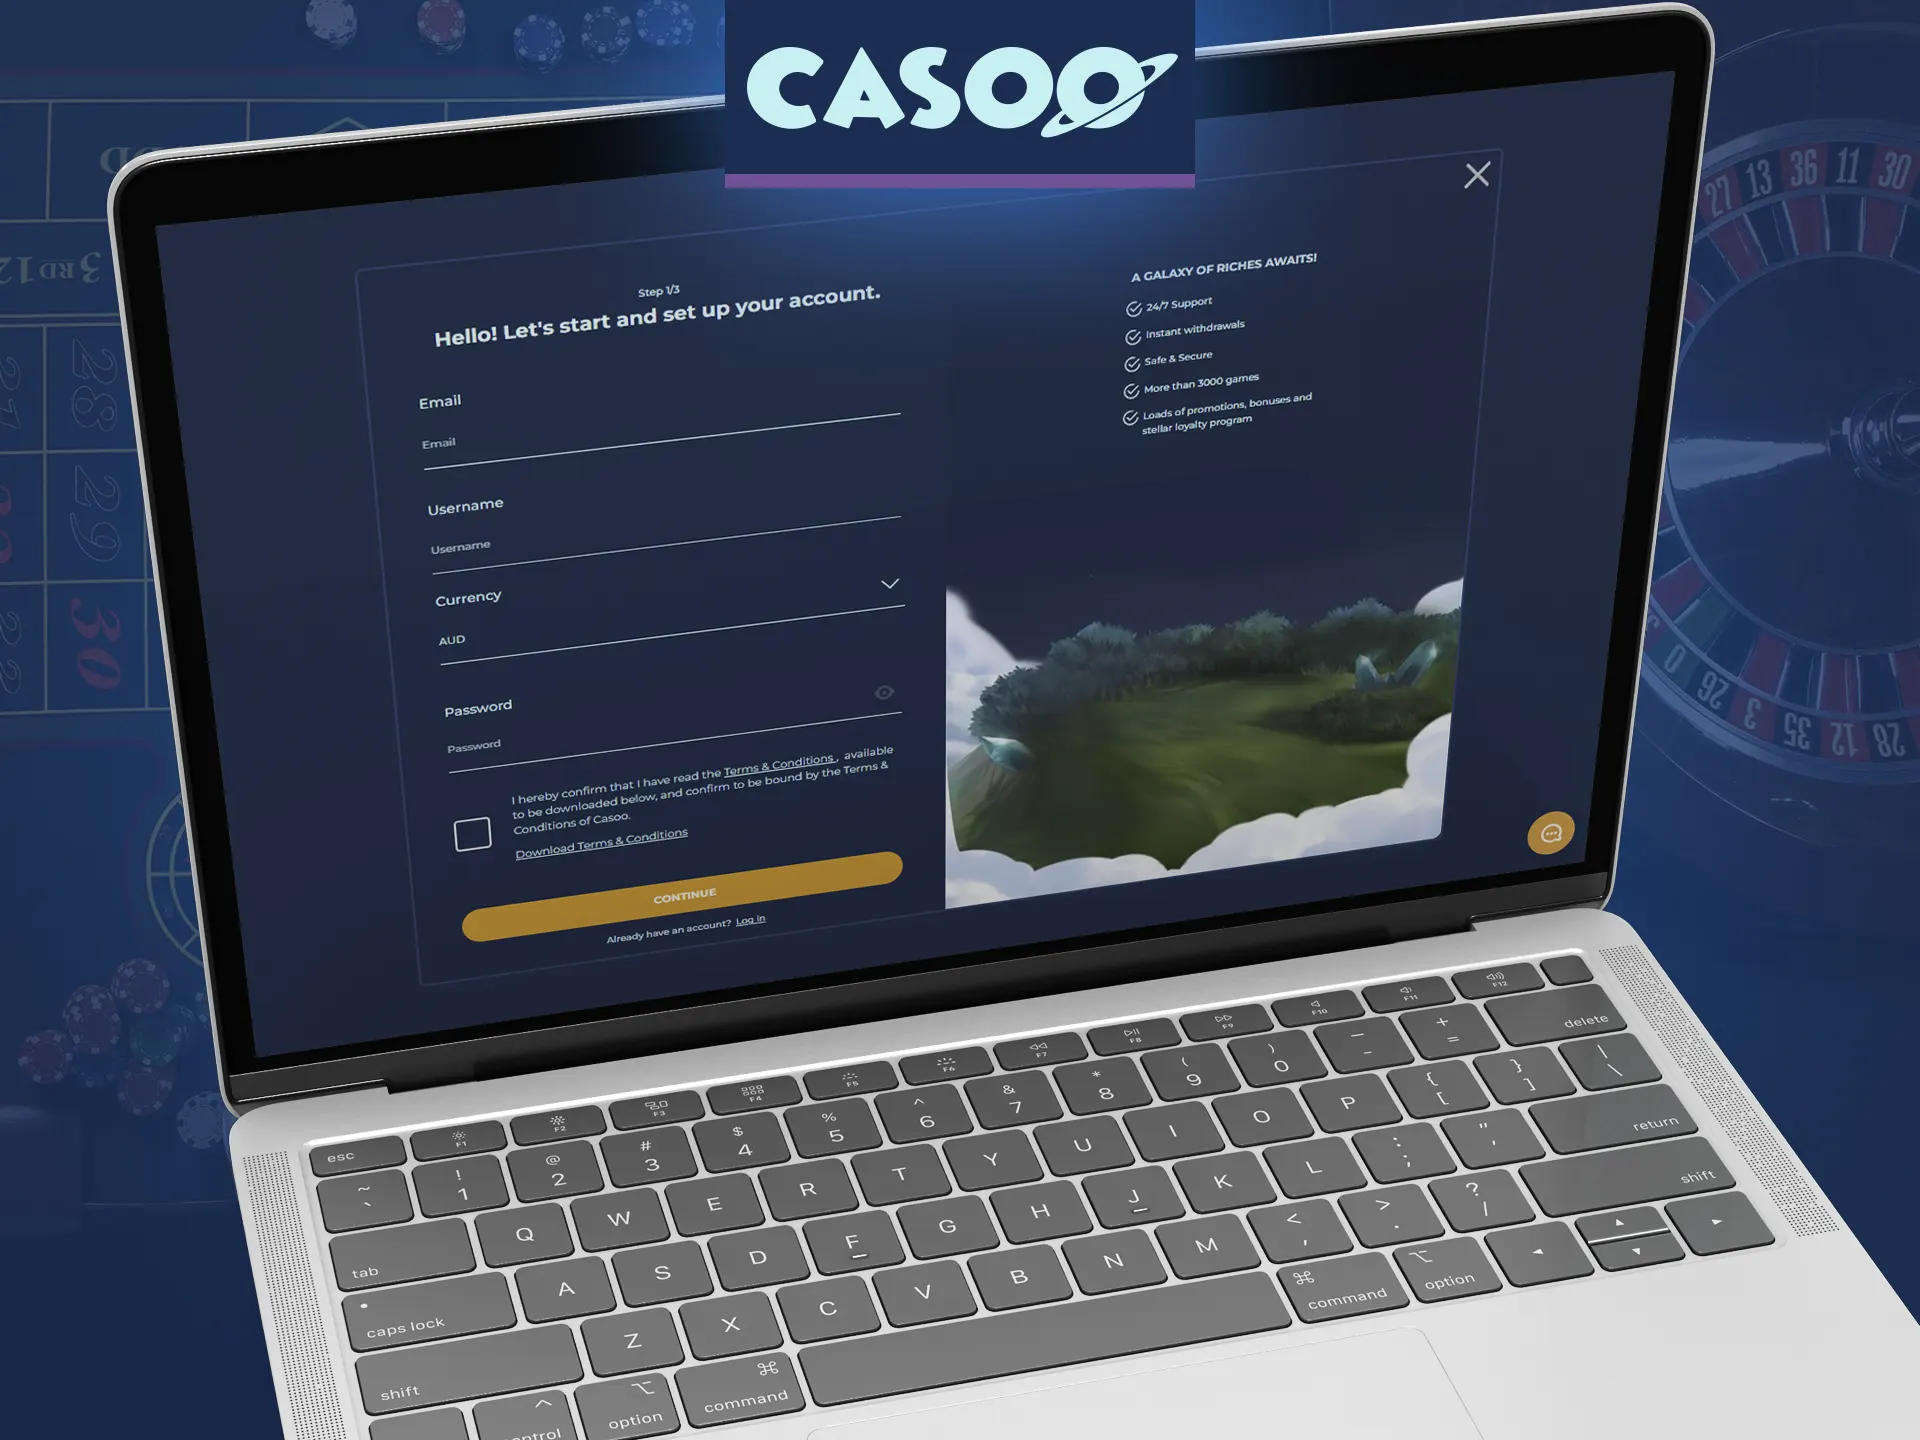 Learn how to register at Casoo casino.